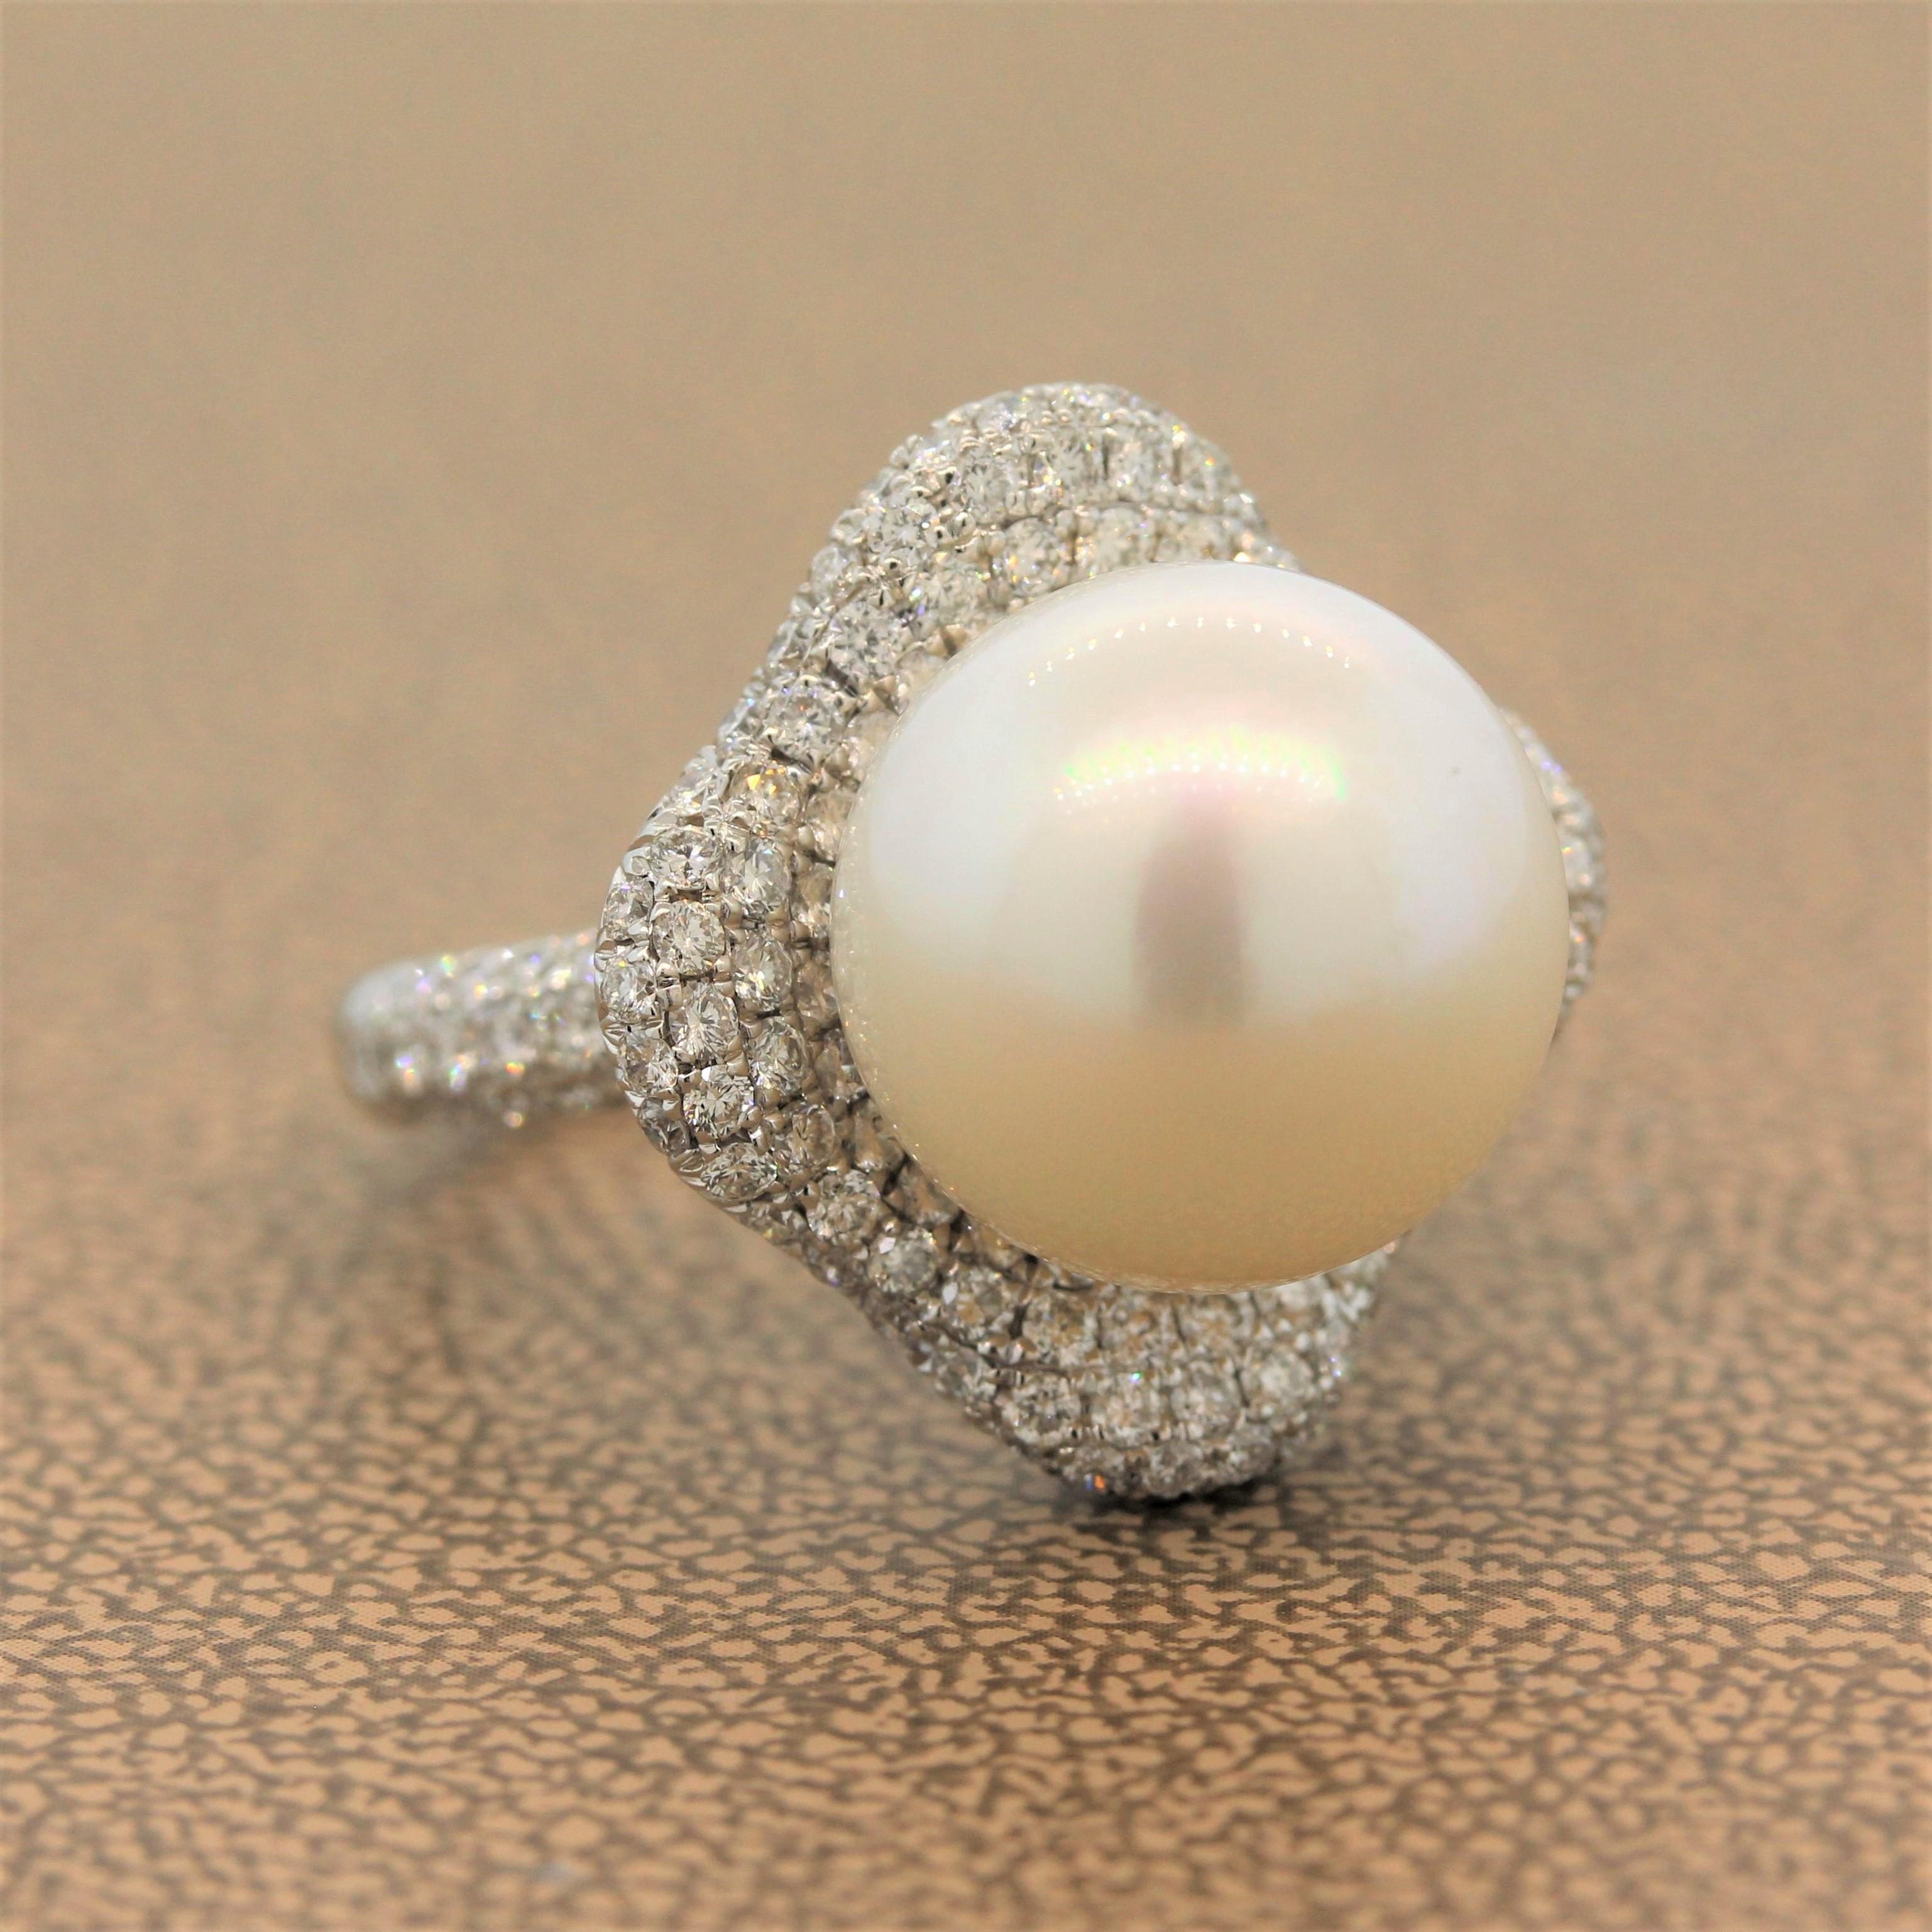 A perfectly round South Sea pearl sits in the center of this concave 18K white gold ring. The wavering halo features 2.36 carats of round cut pave set diamonds illuminating the lustrous pearl.

Ring Size 6.75
